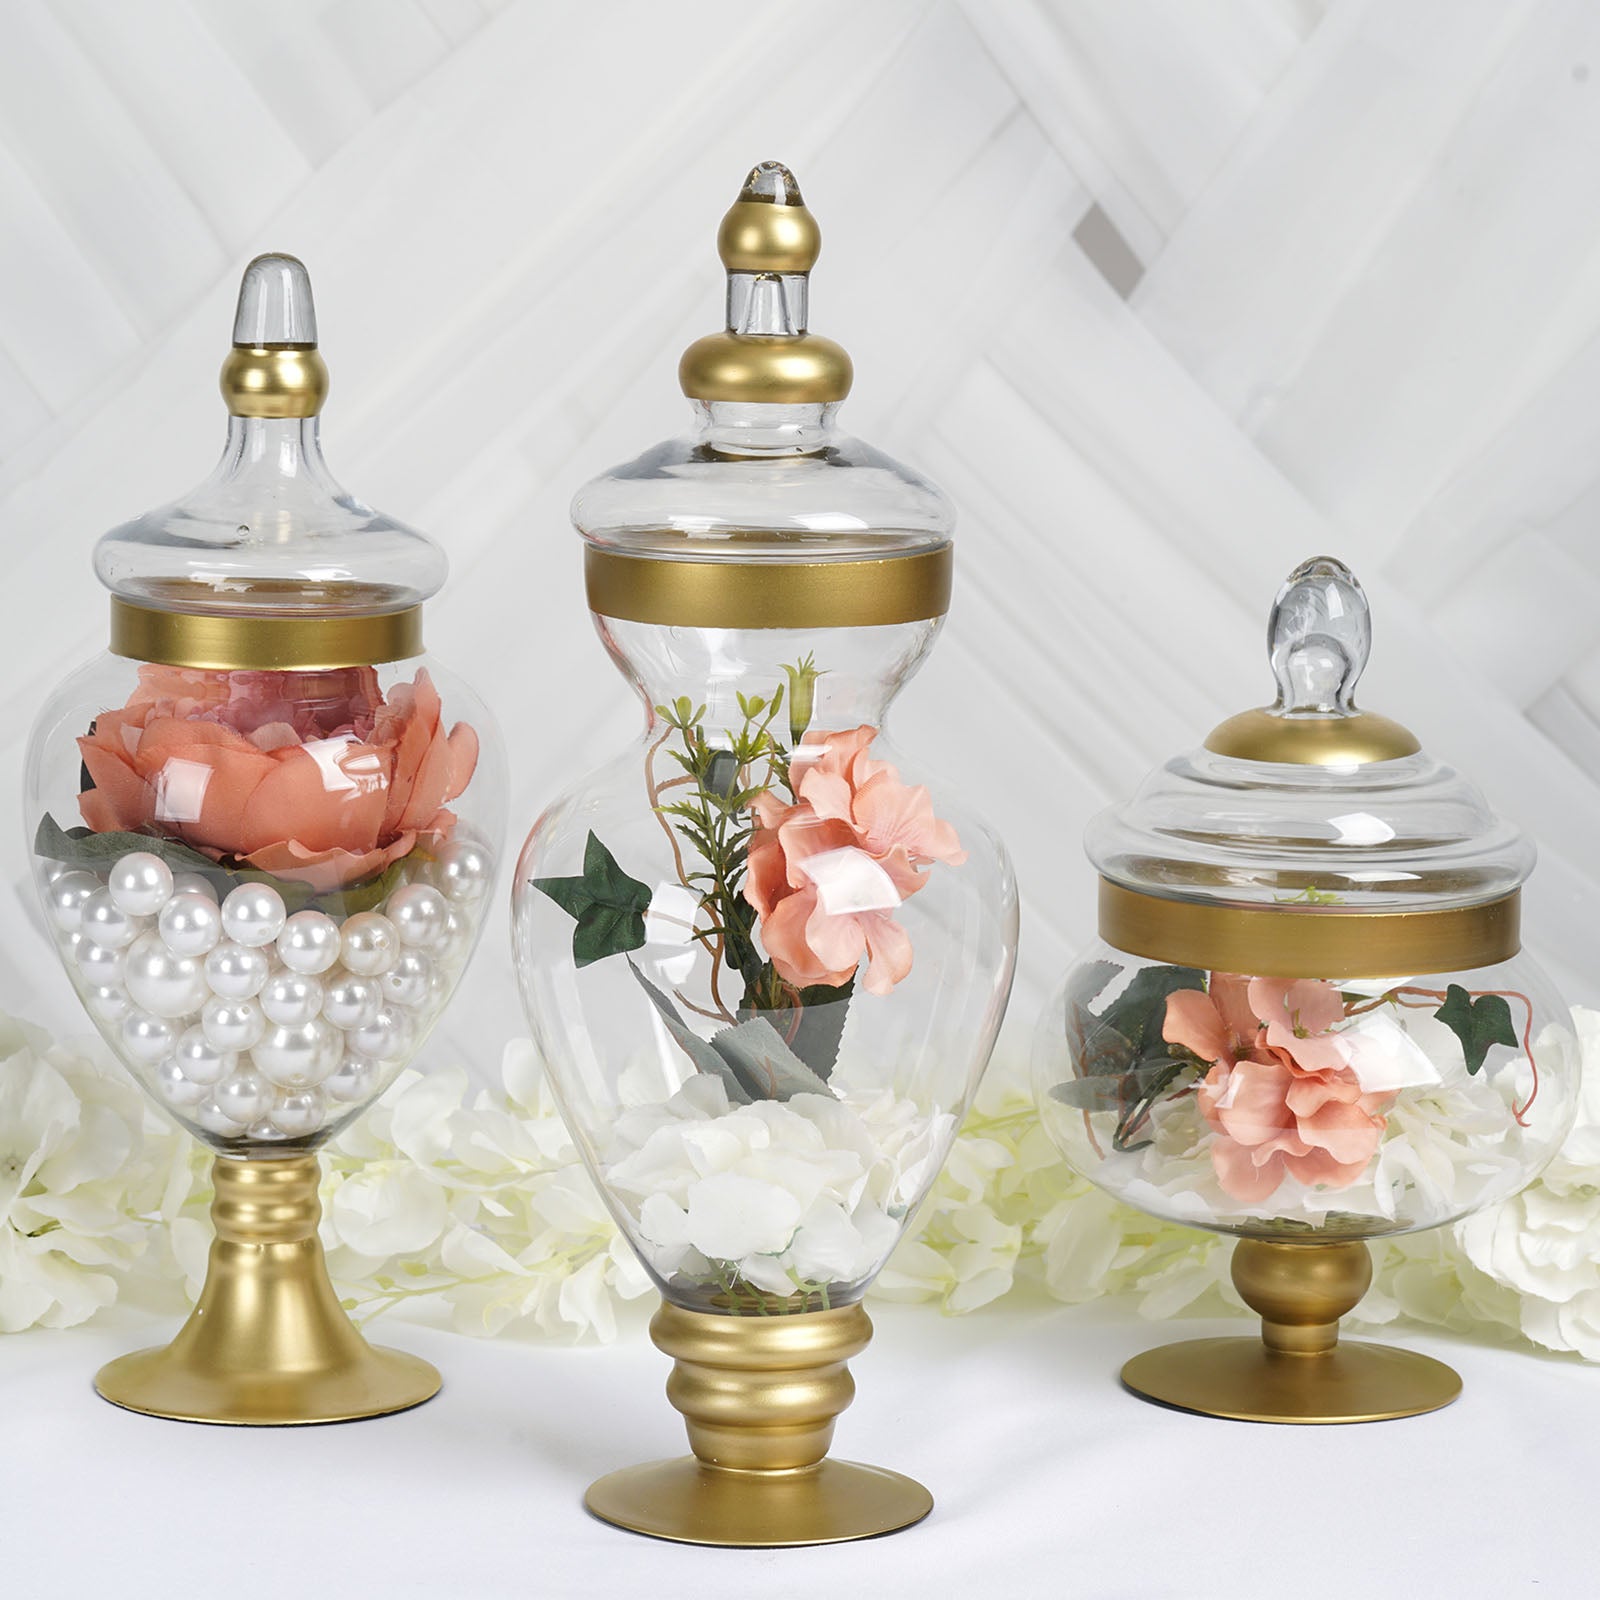 Set of 3 | Large Gold Trim Glass Apothecary Party Favor Candy Jars with Snap on Lids - 10/14/16 | by Tableclothsfactory